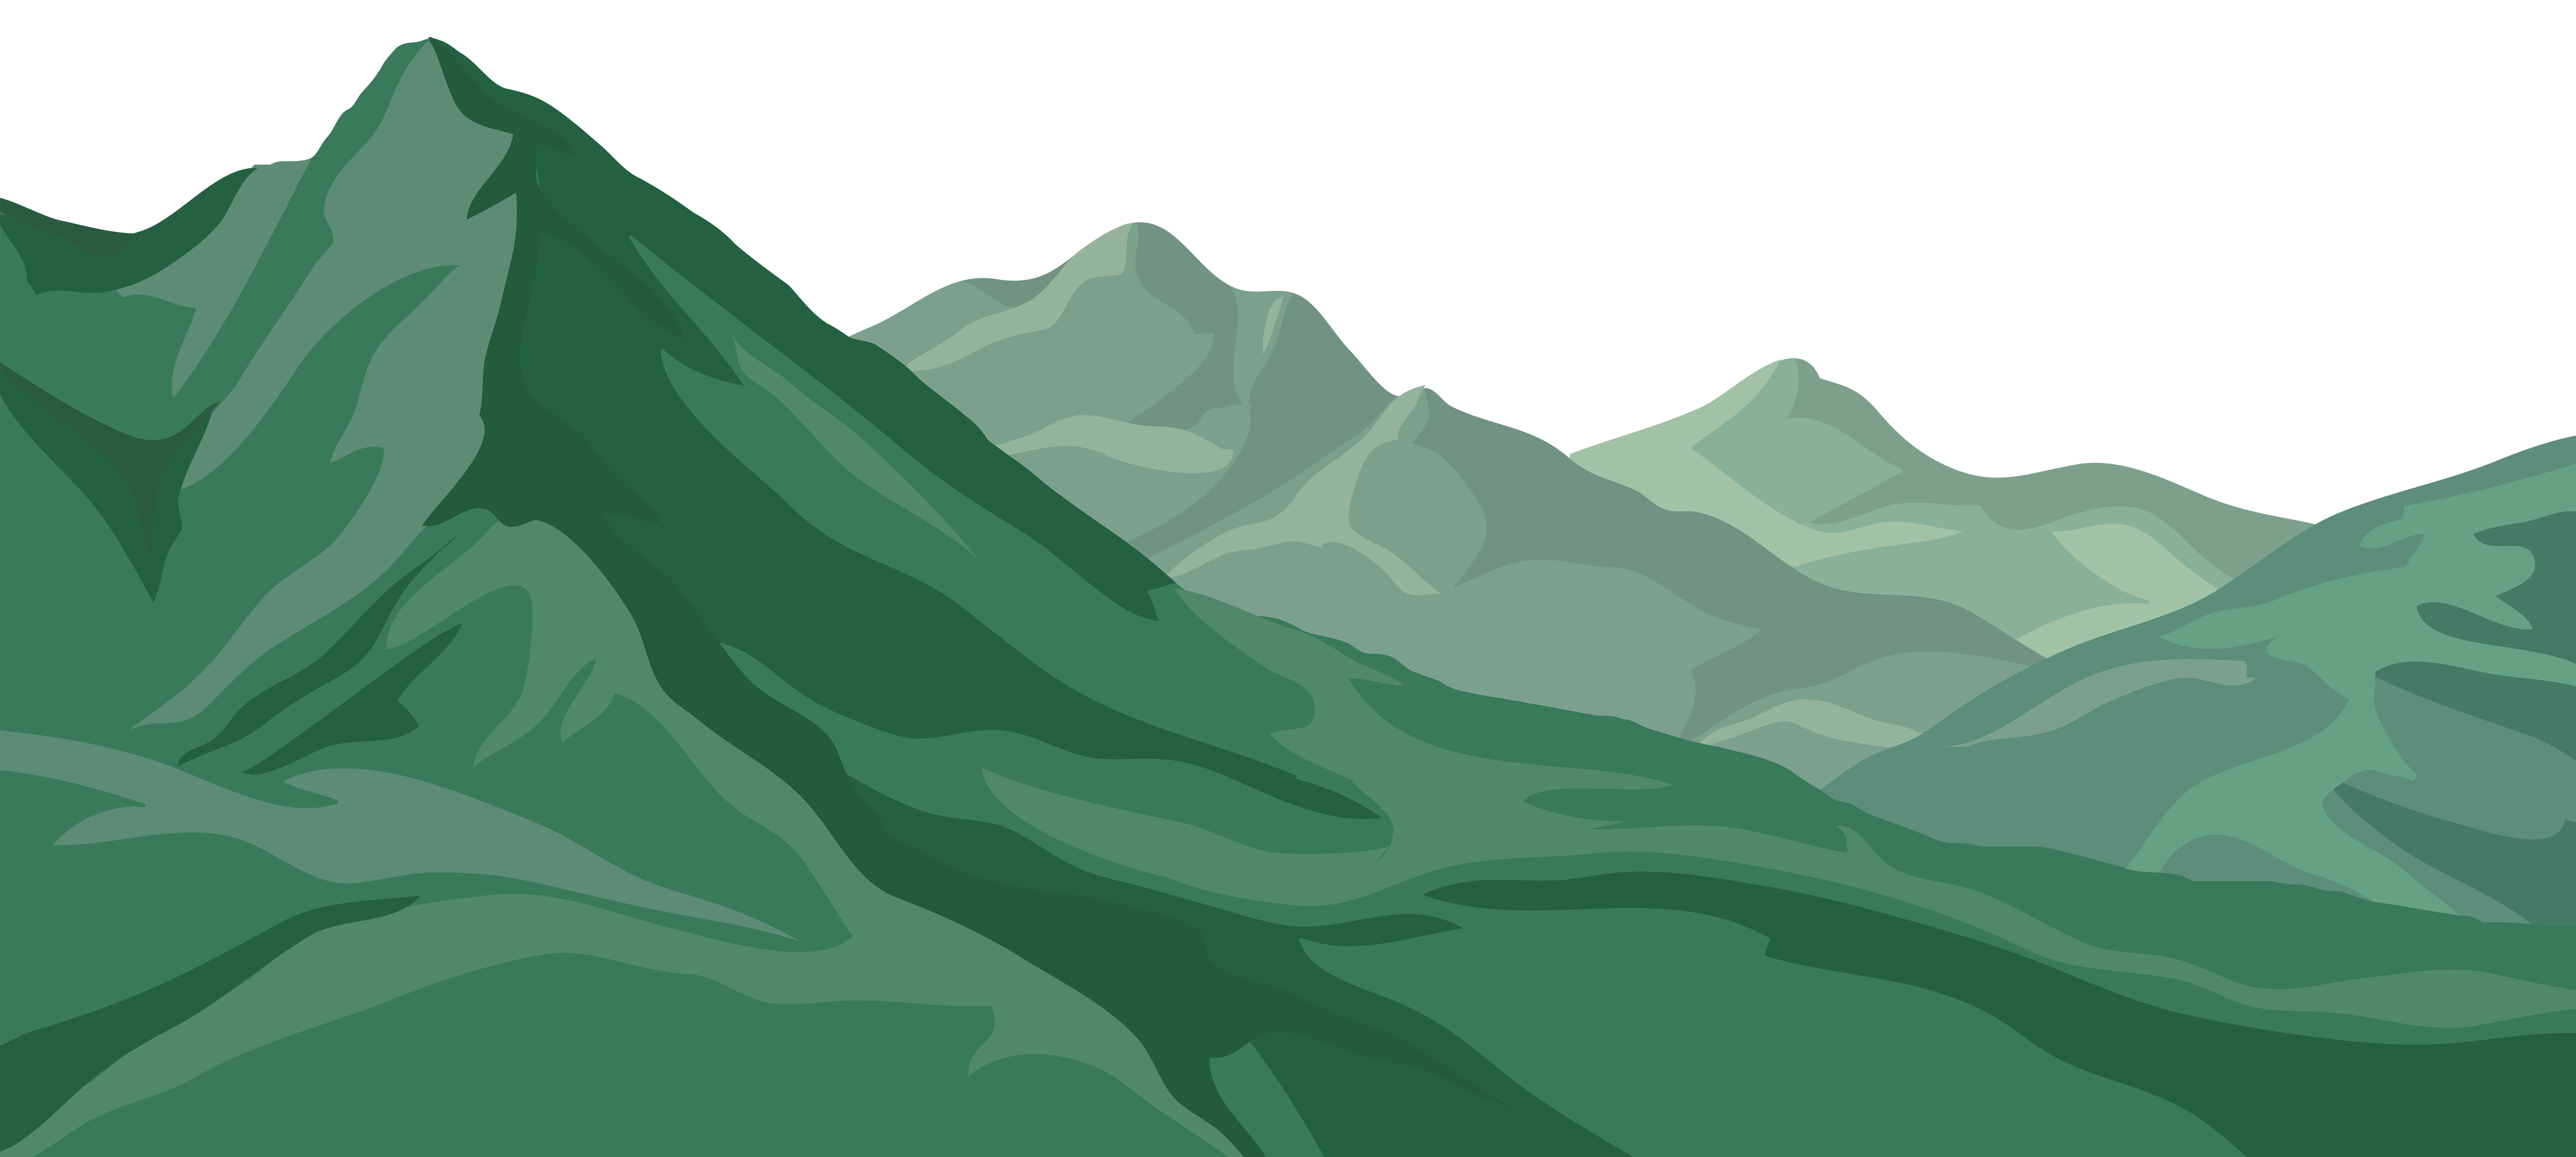 Mountain PNG Clip Art Image​ | Gallery Yopriceville - High-Quality Free  Images and Transparent PNG Clipart